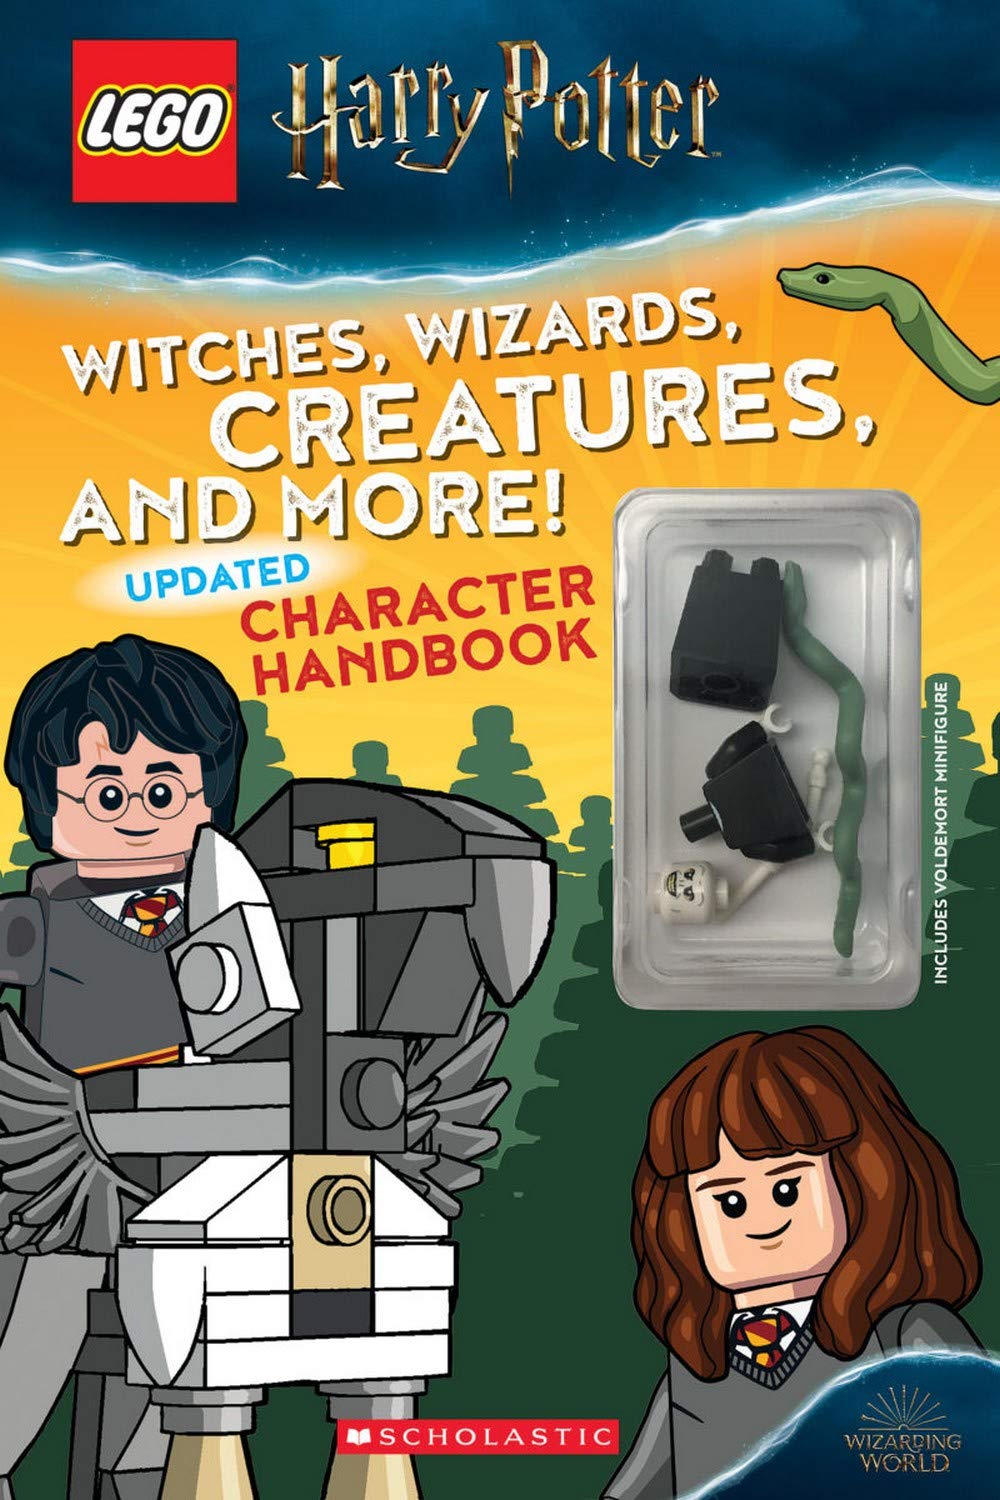 LEGO Harry Potter: Witches, Wizards, Creatures, and More!